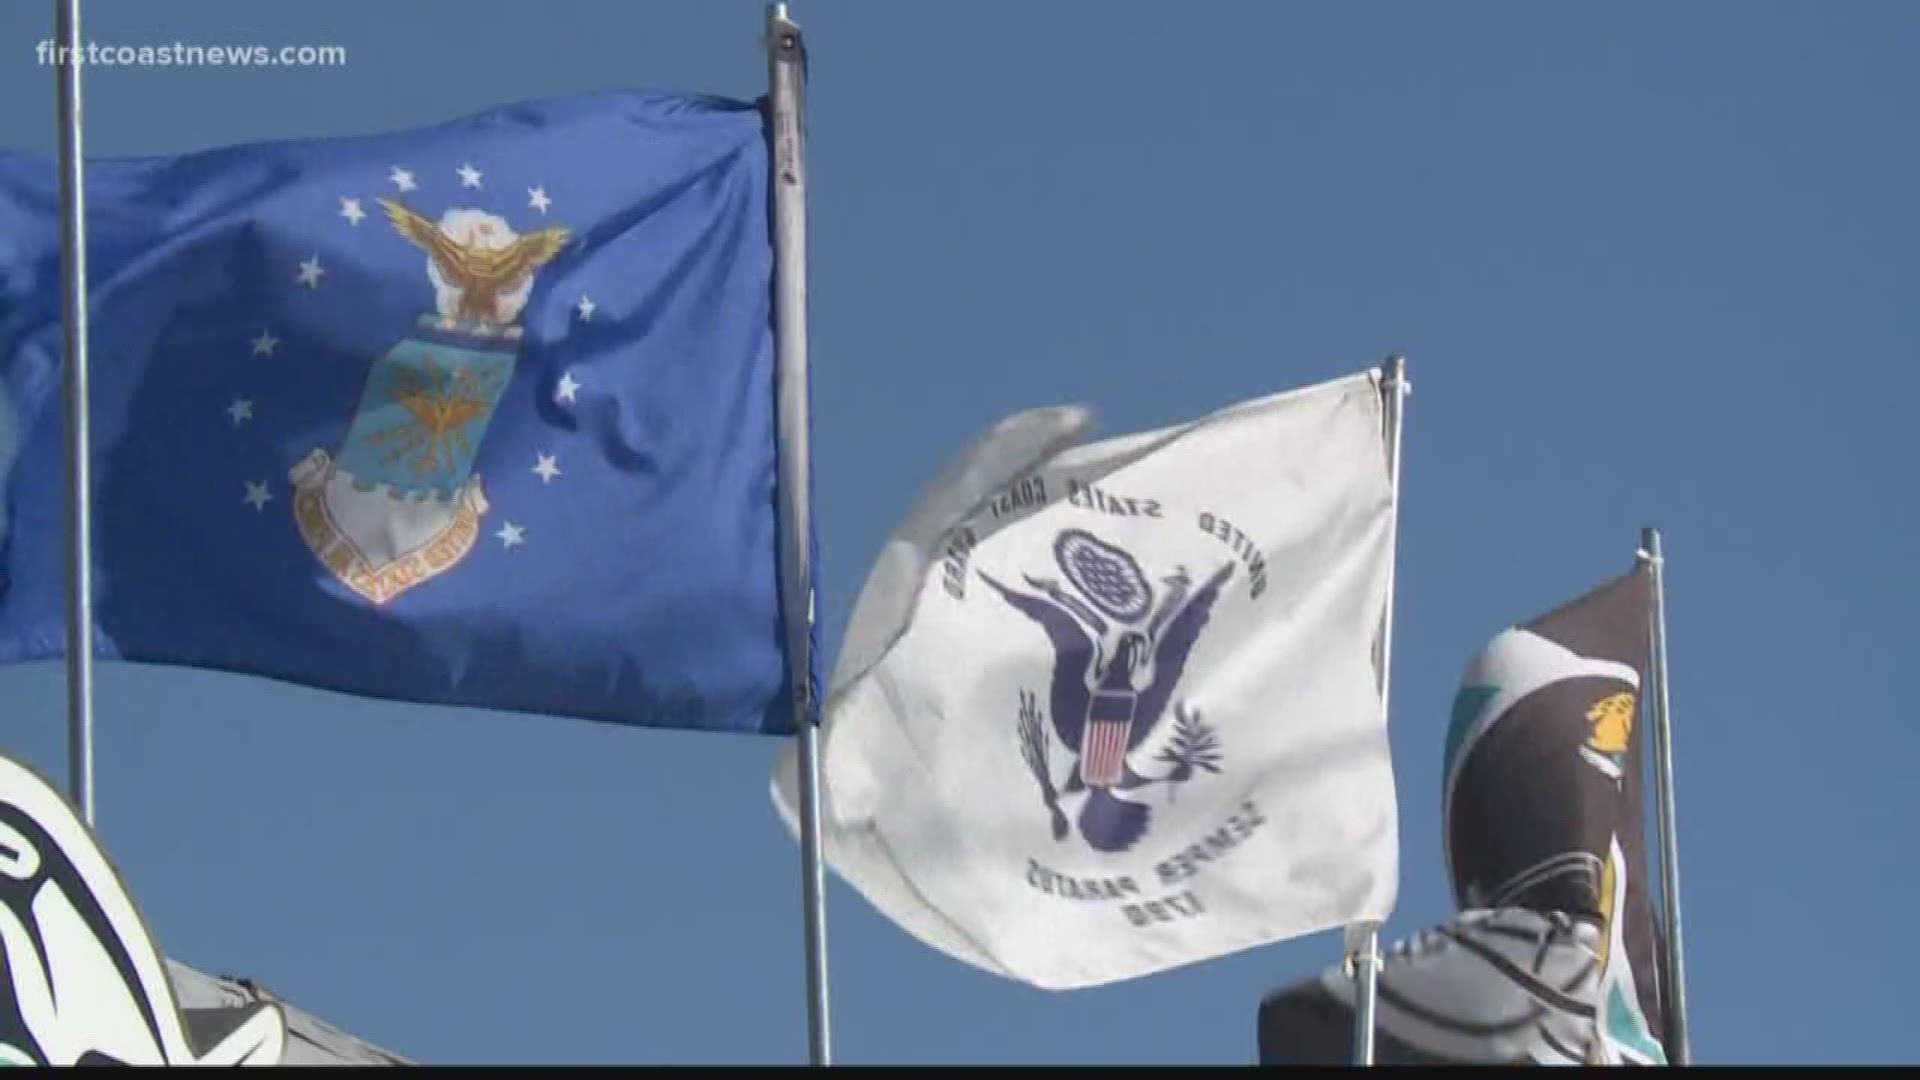 A Jacksonville City employee and her supervisor have been placed on administrative leave after citing a local business for flying military flags.